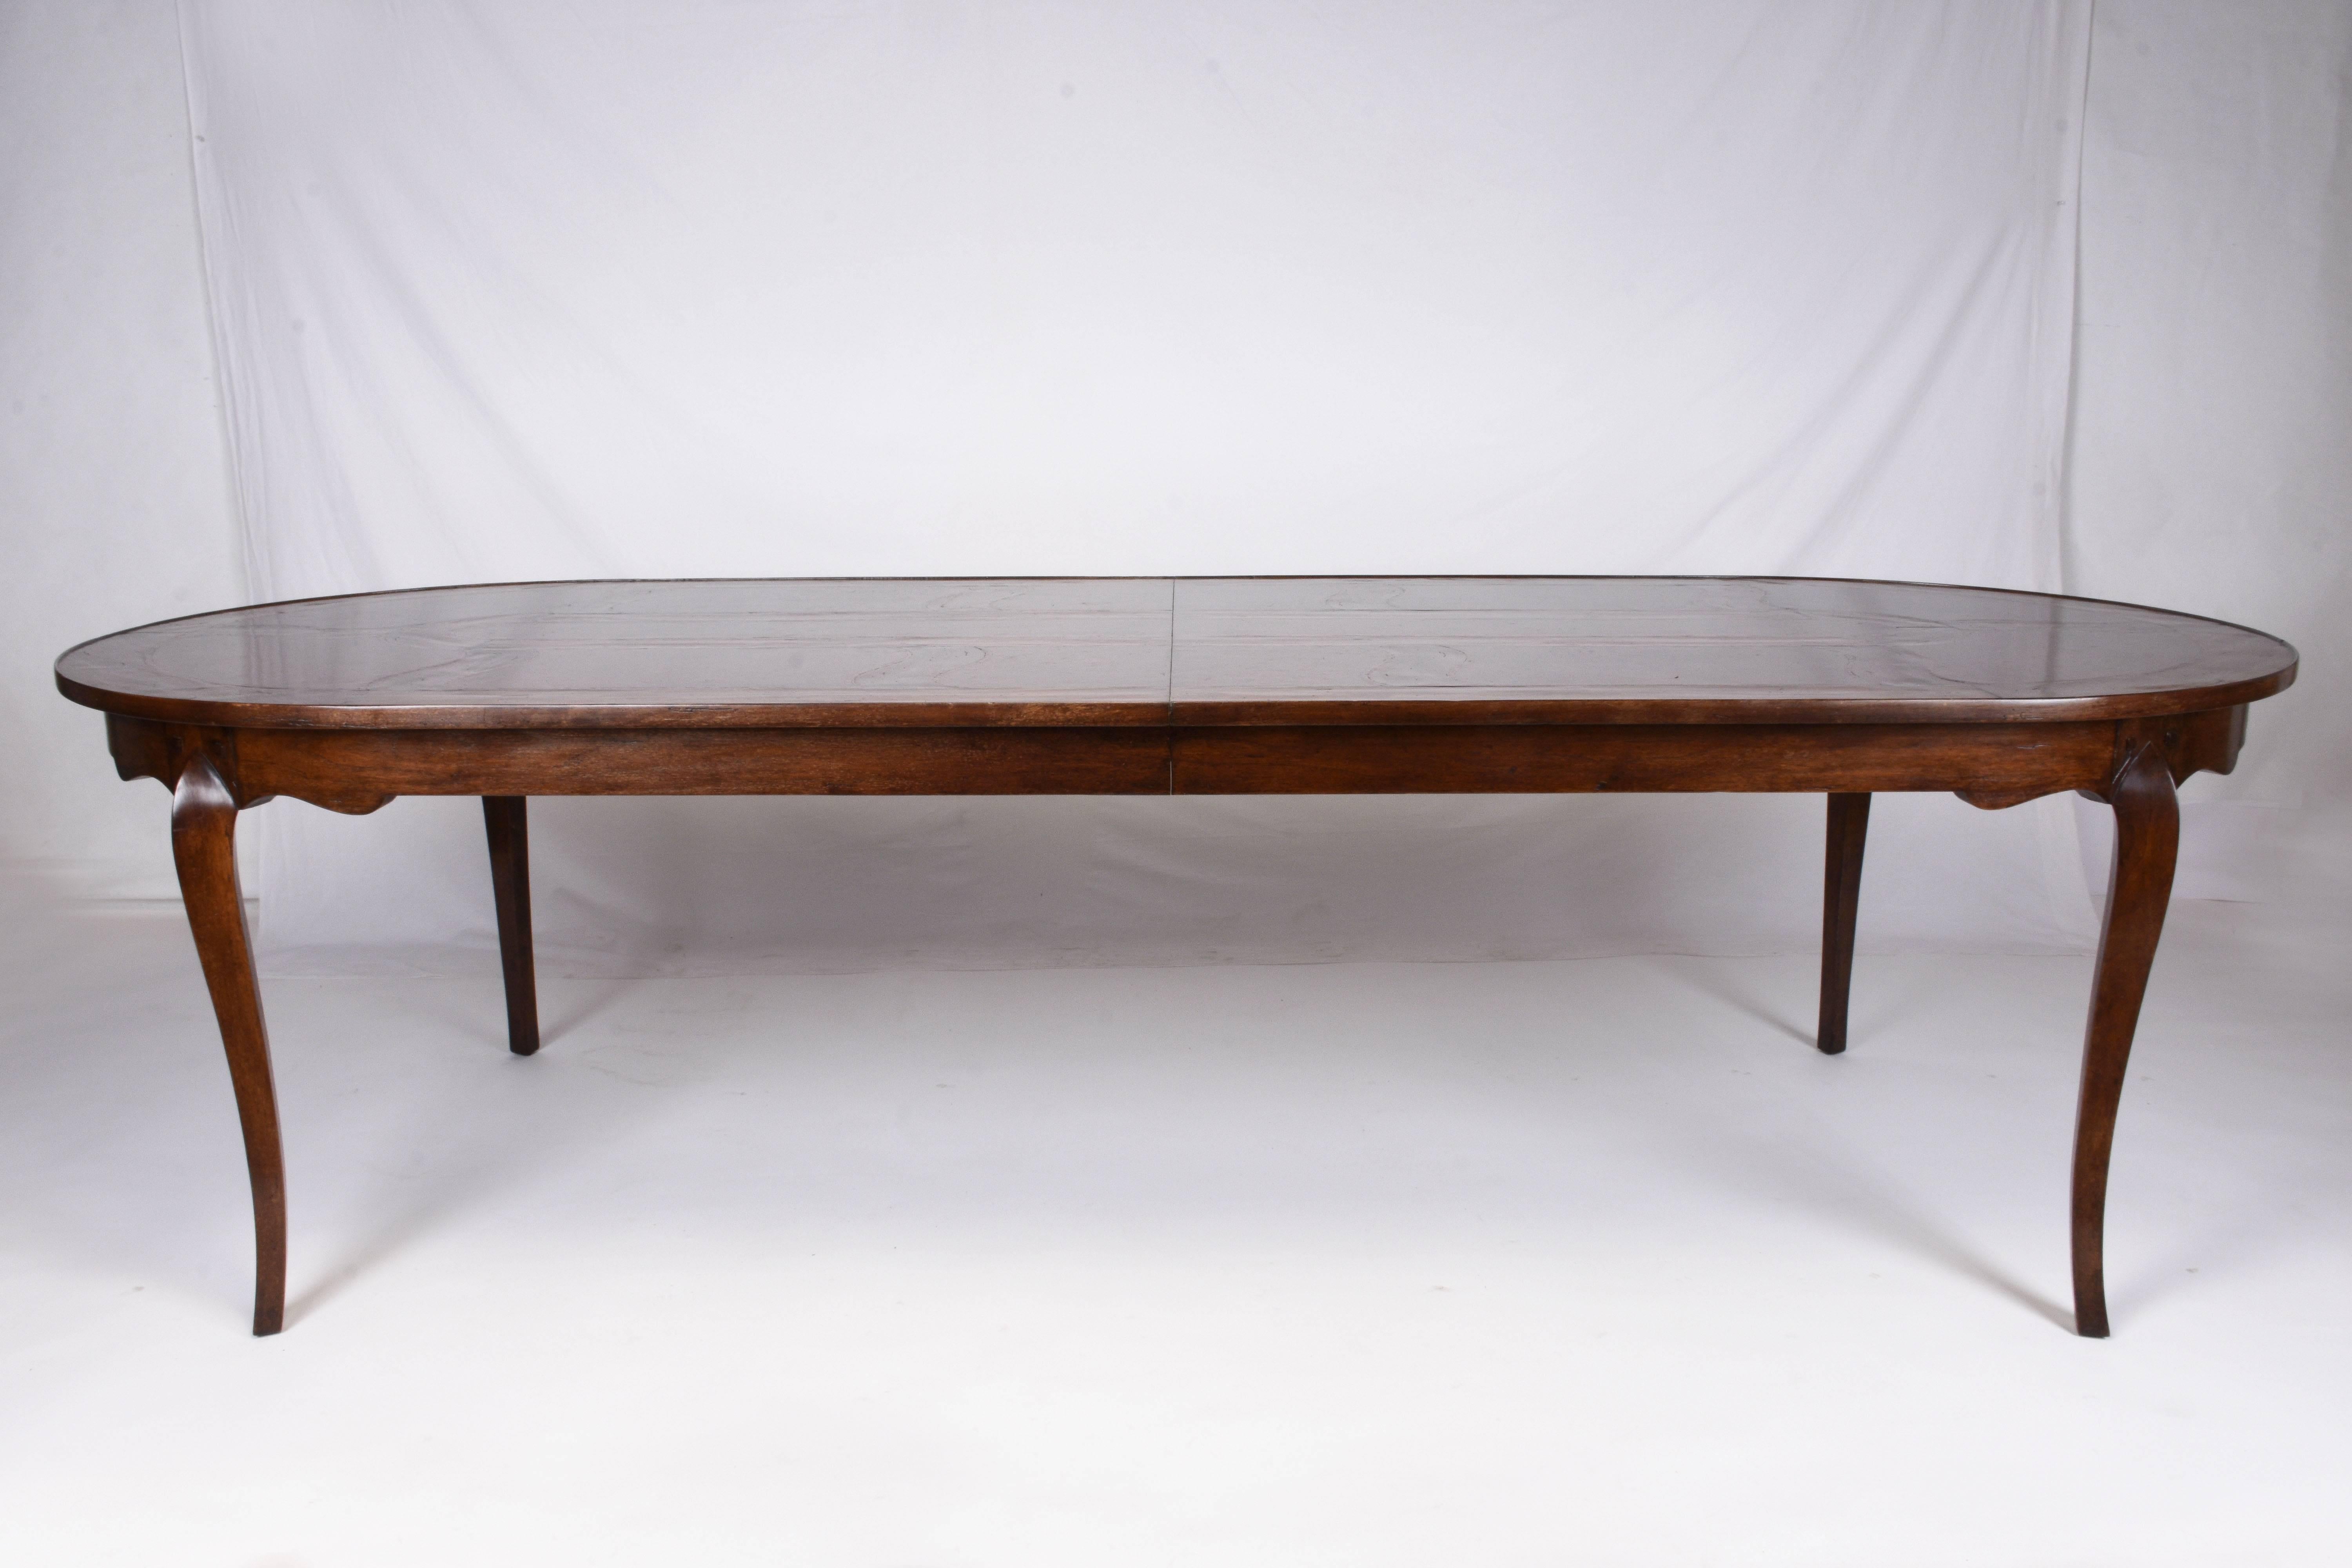 This 1950s grand Italian oval dining room table is made from walnut wood with beautiful inlaid details throughout. The dark walnut stained finish is off set by the honey colored inlaid patterns. The carved legs feature a serpentine shape that mimics